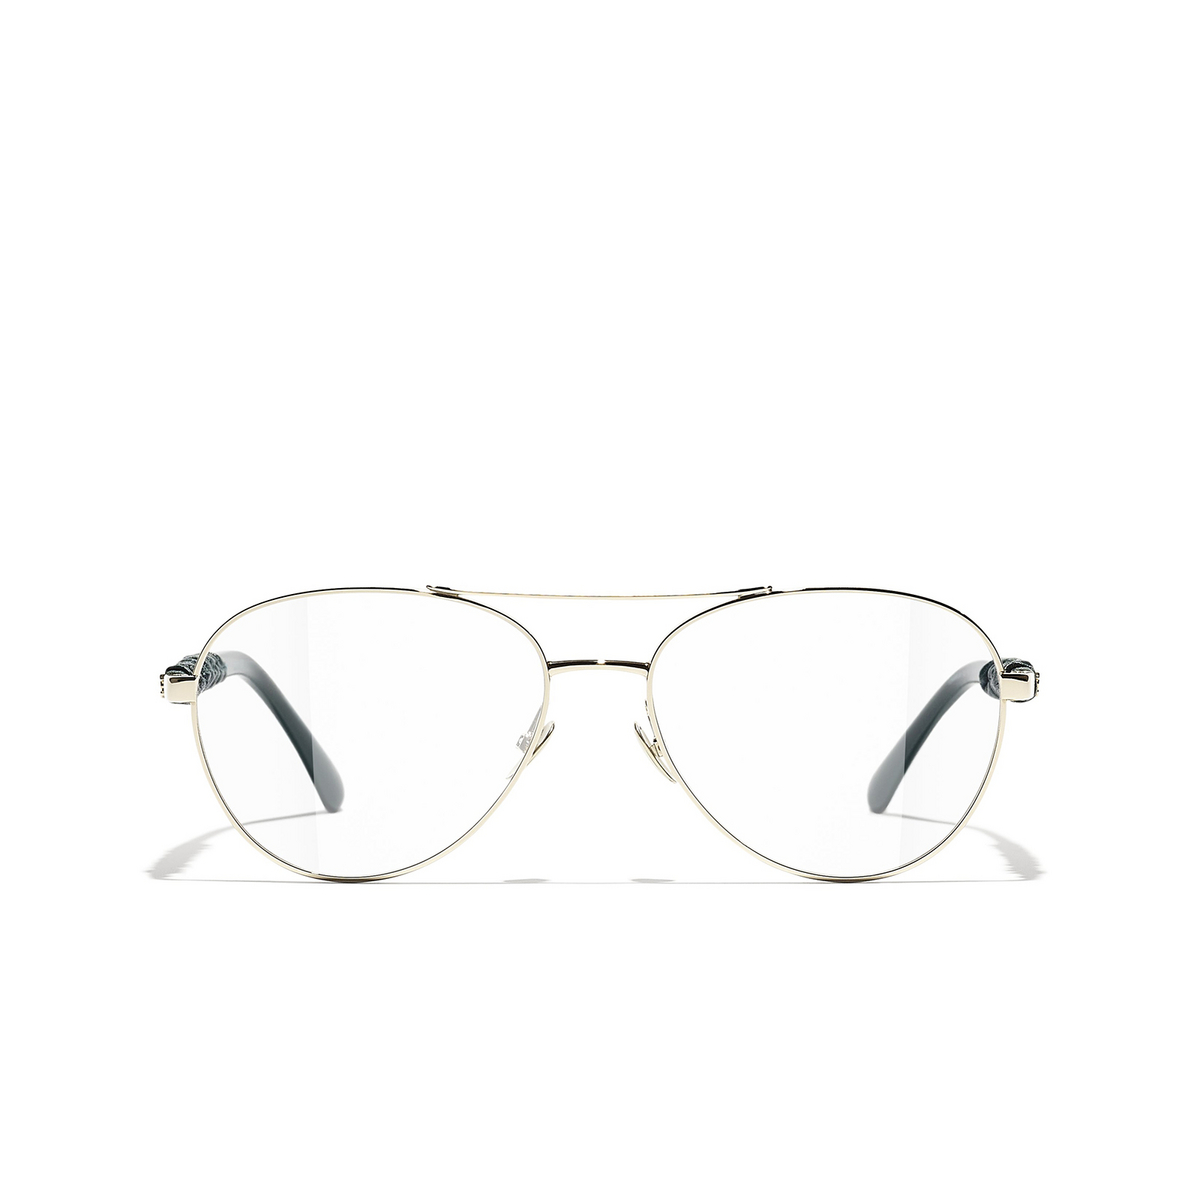 CHANEL pilot Eyeglasses C468 Gold & Green - front view